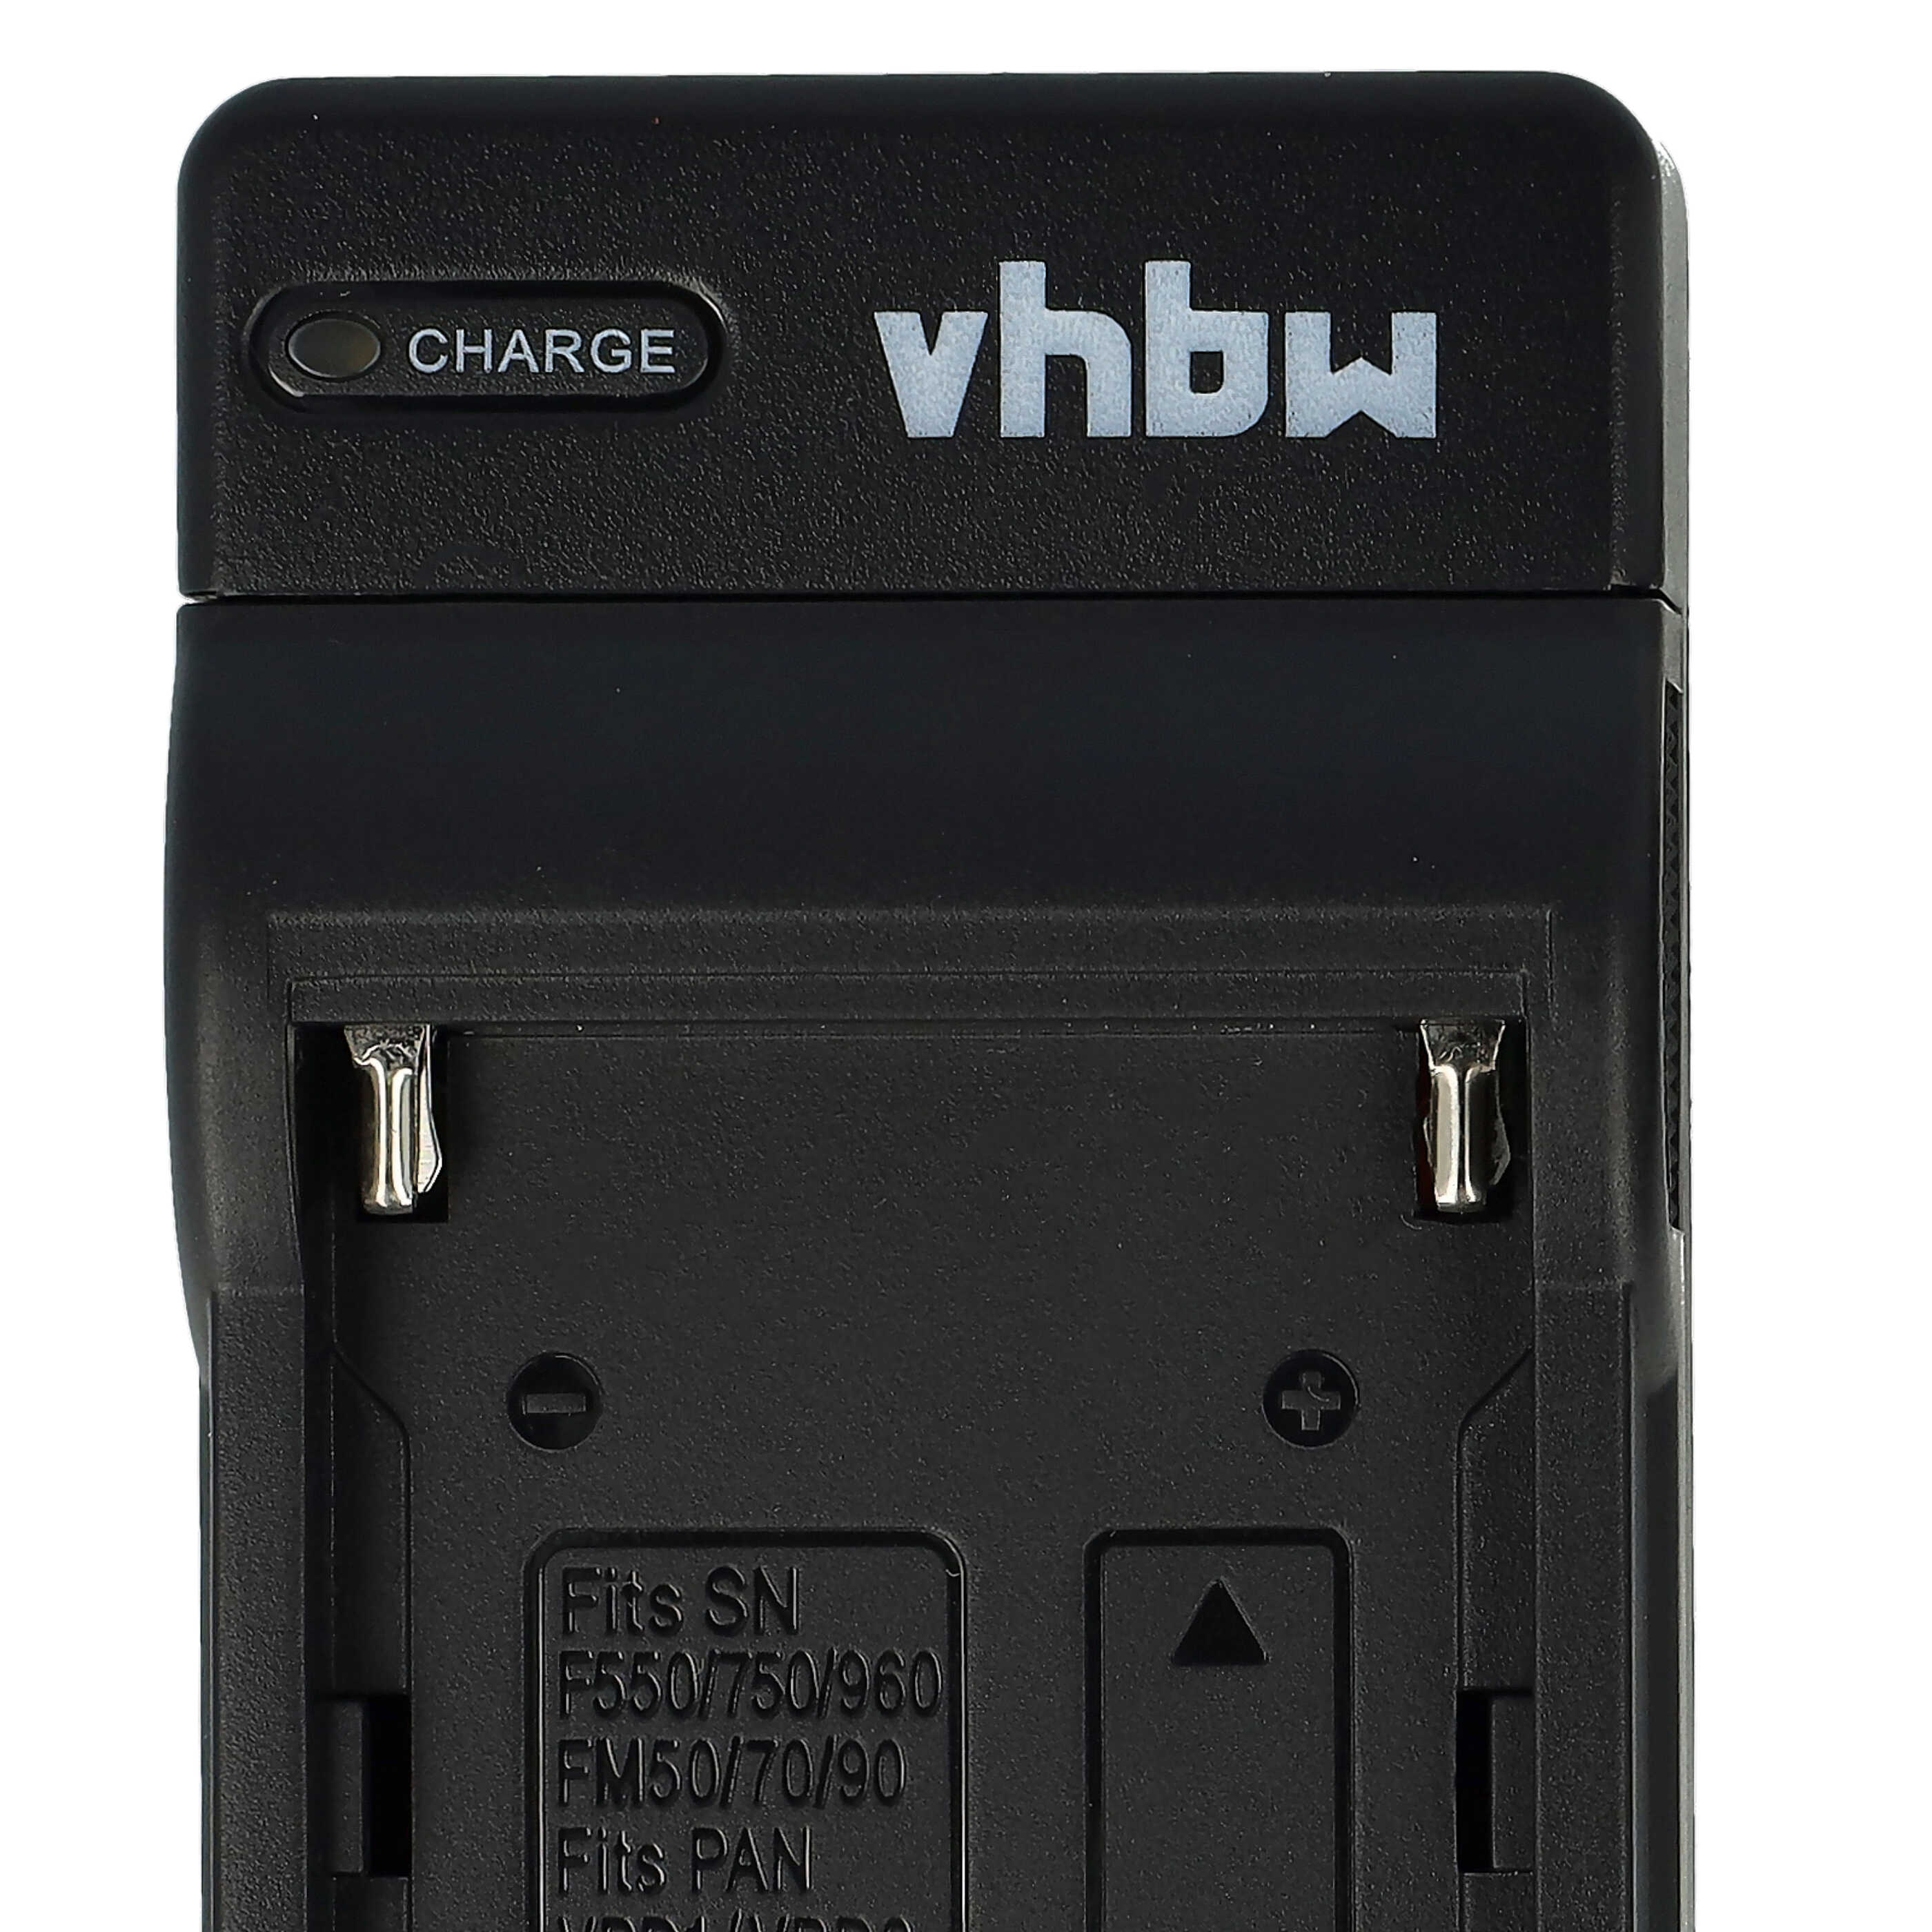 Battery Charger replaces Sony BC-VM10 suitable for Grundig BP-10 Camera etc. - 0.5 A, 8.4 V